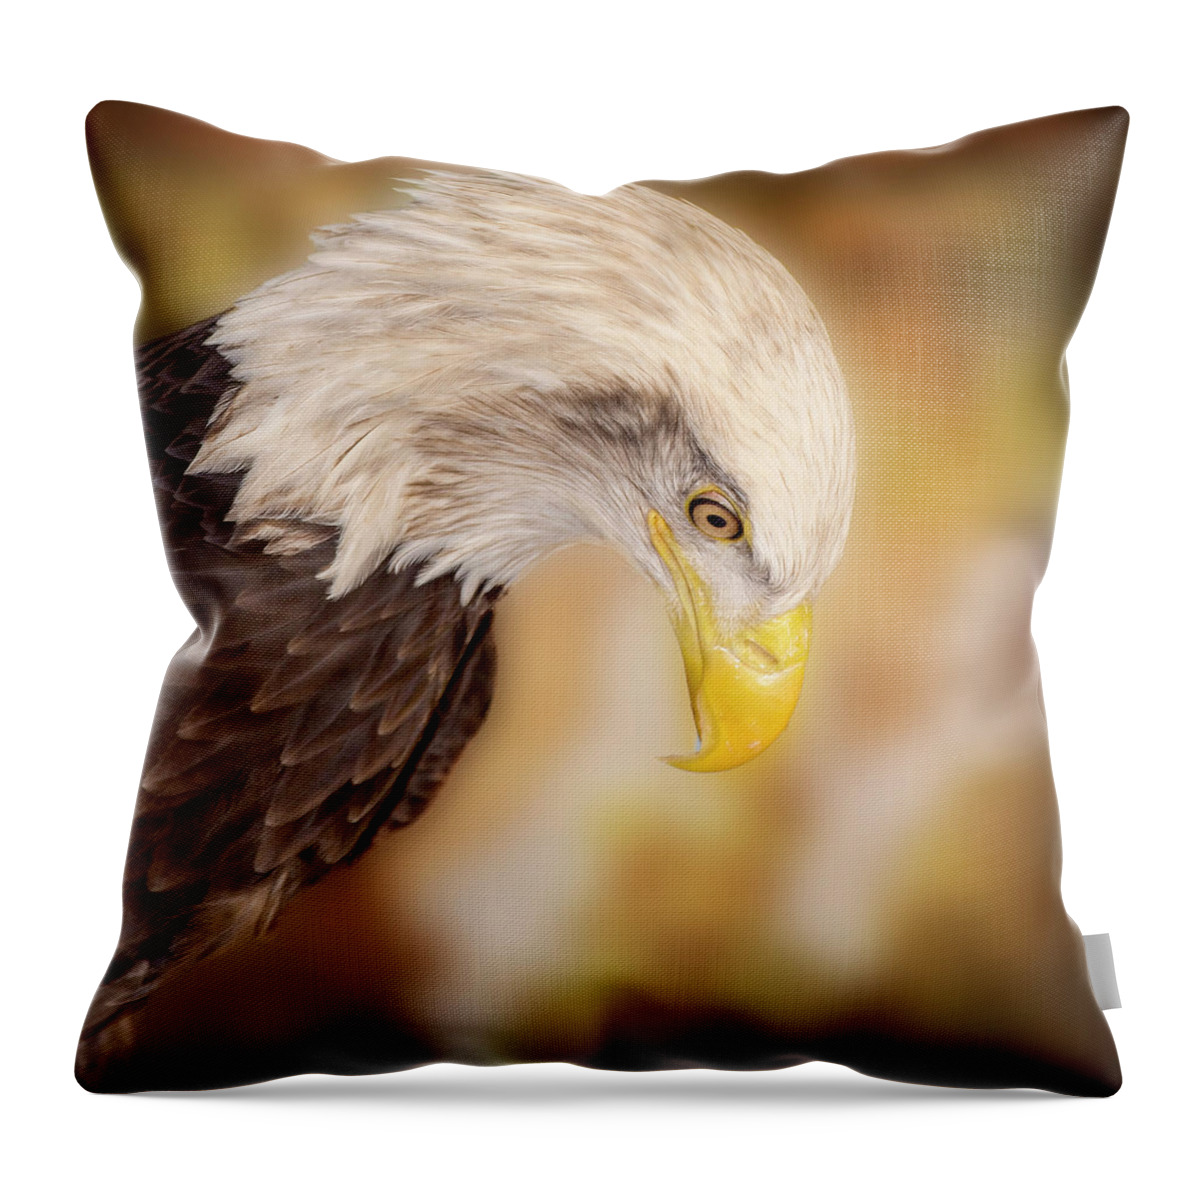 Bald Eagle Throw Pillow featuring the photograph Bow Your Head and Prey by Bill and Linda Tiepelman